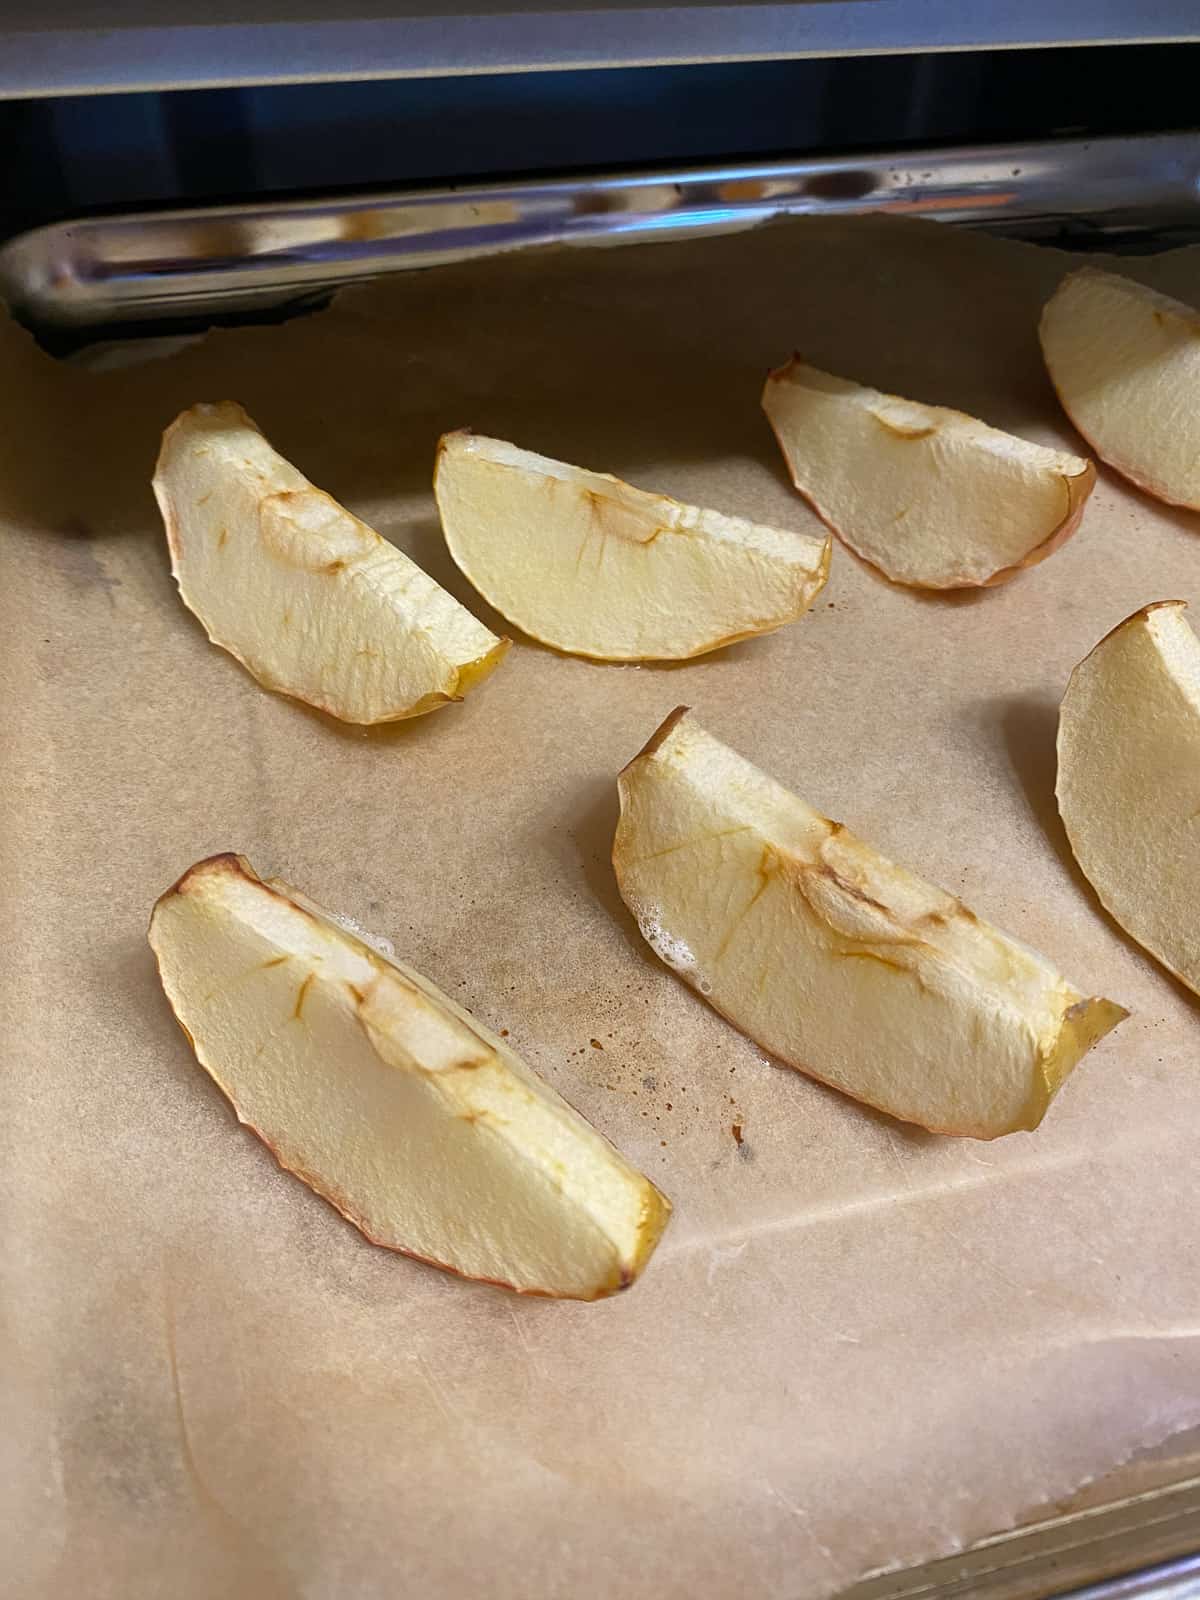 post baked apples on a baking sheet